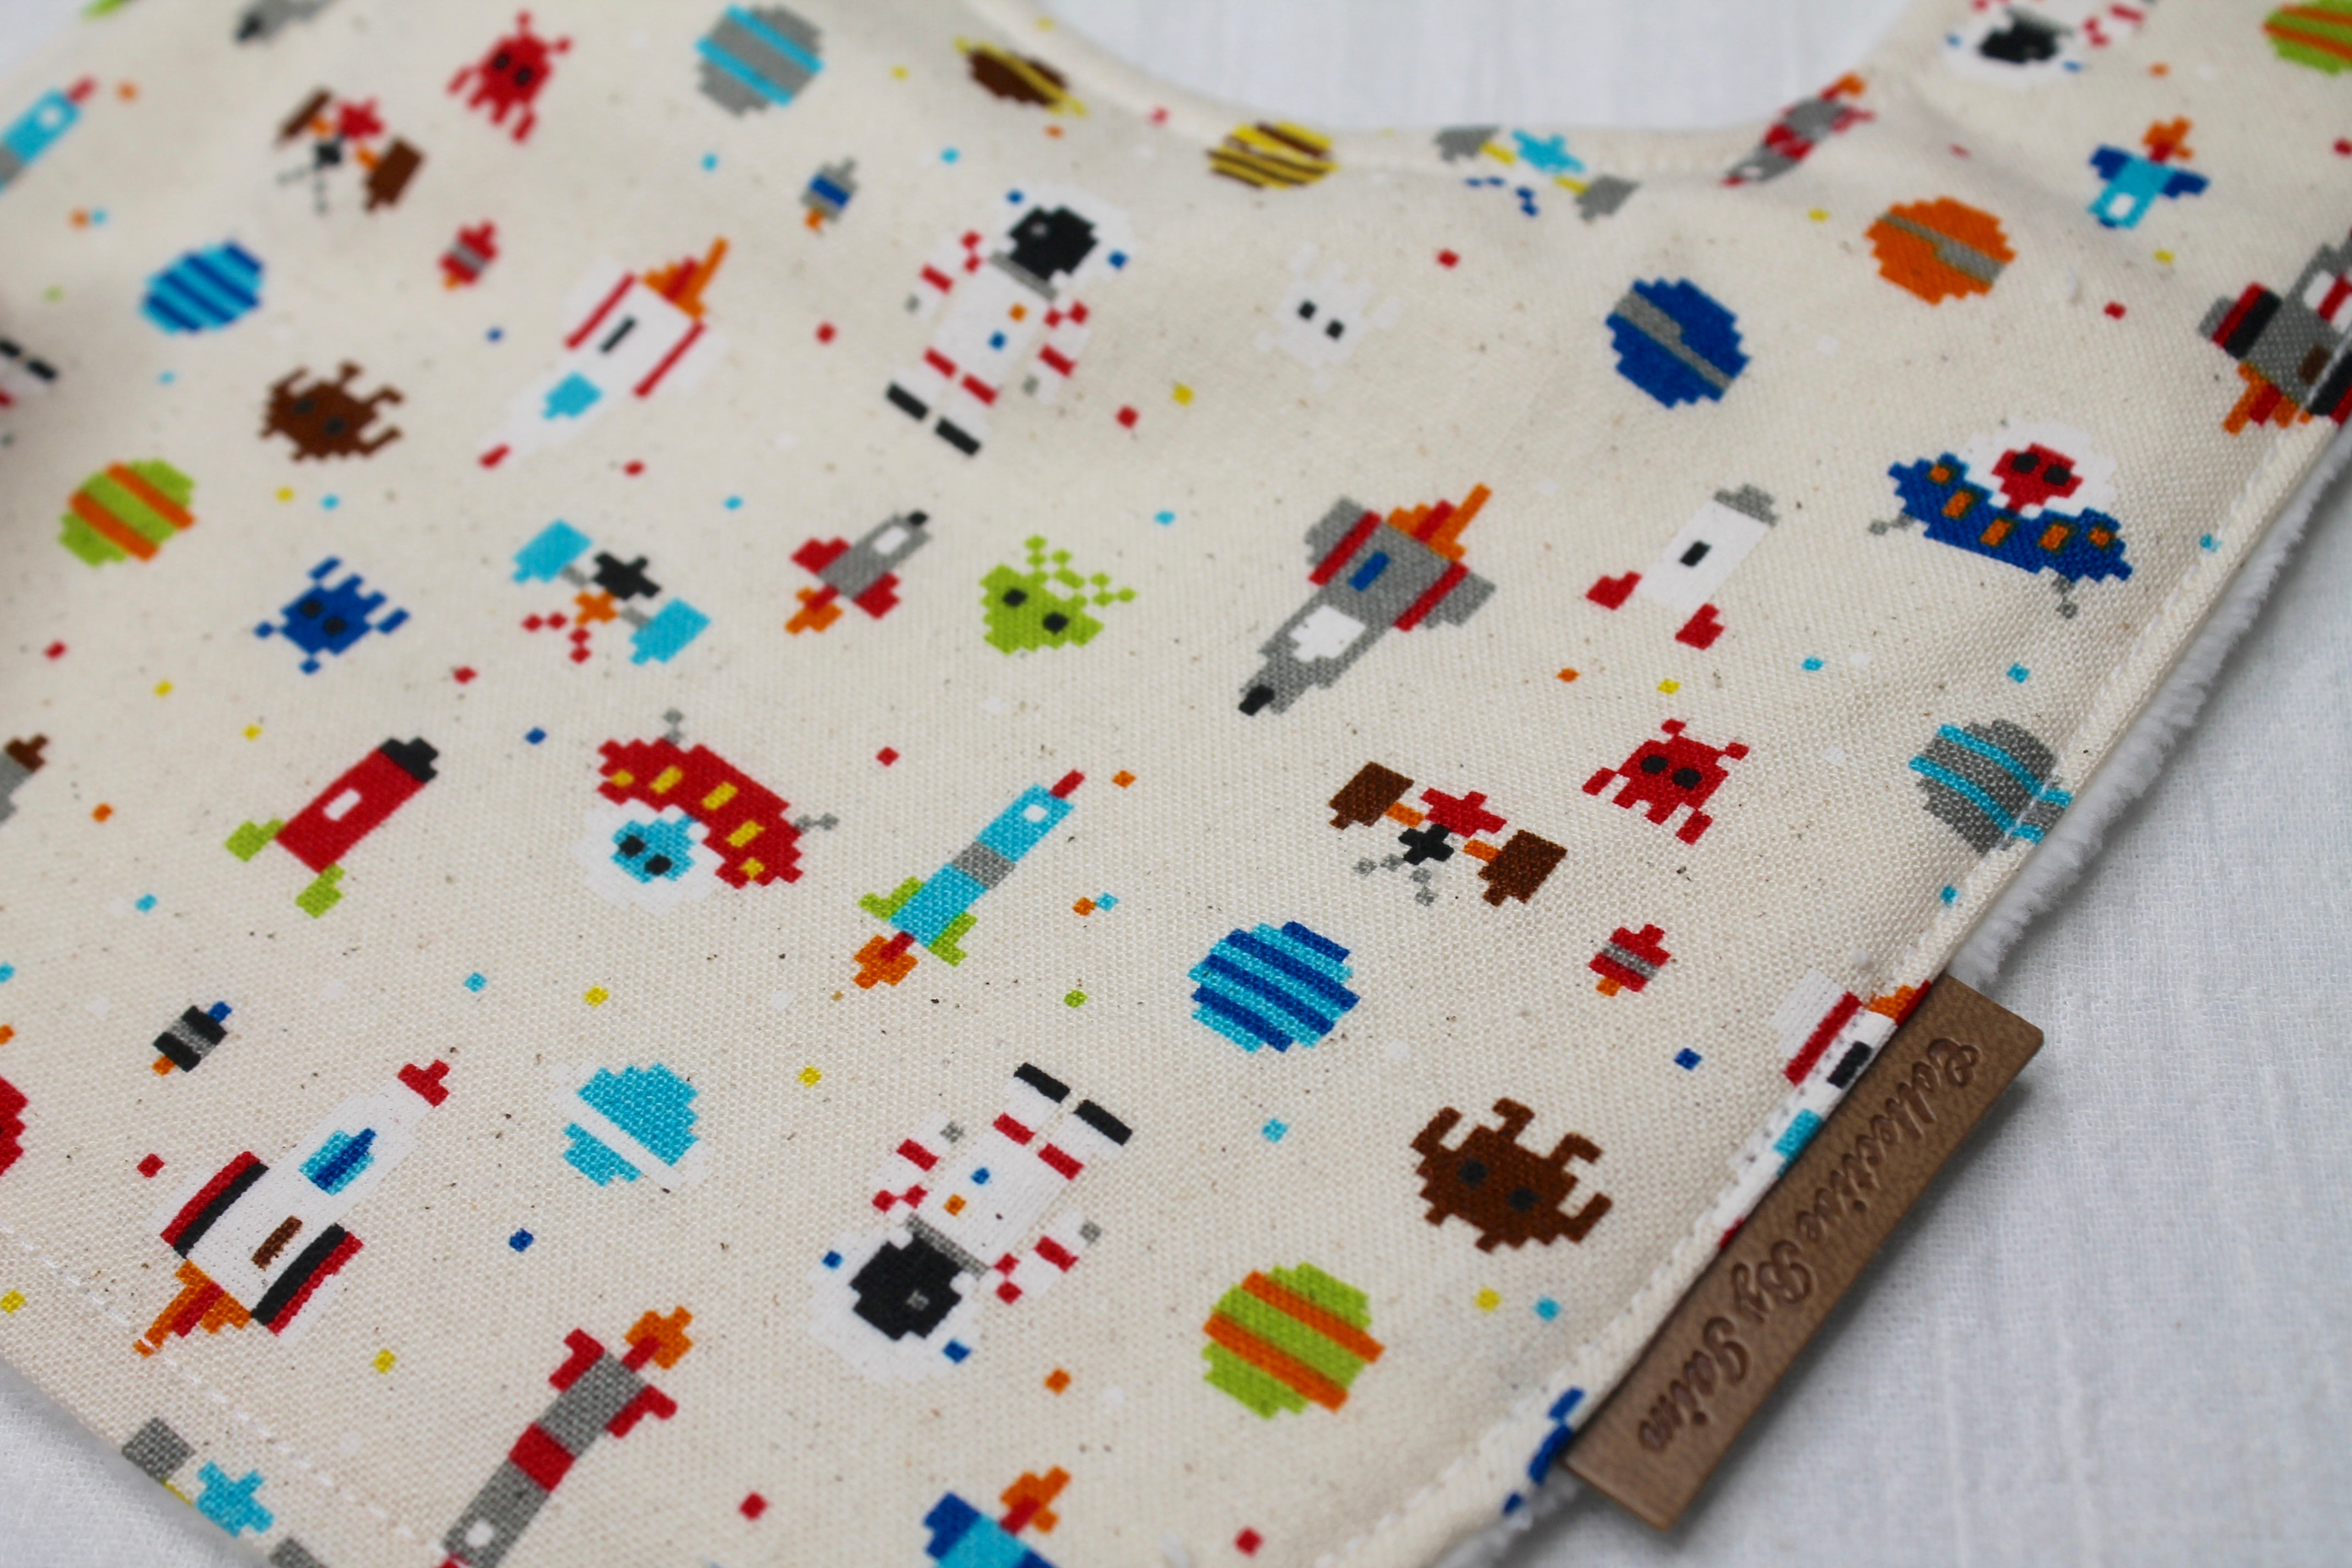 Brody Bib with Cotton Backing